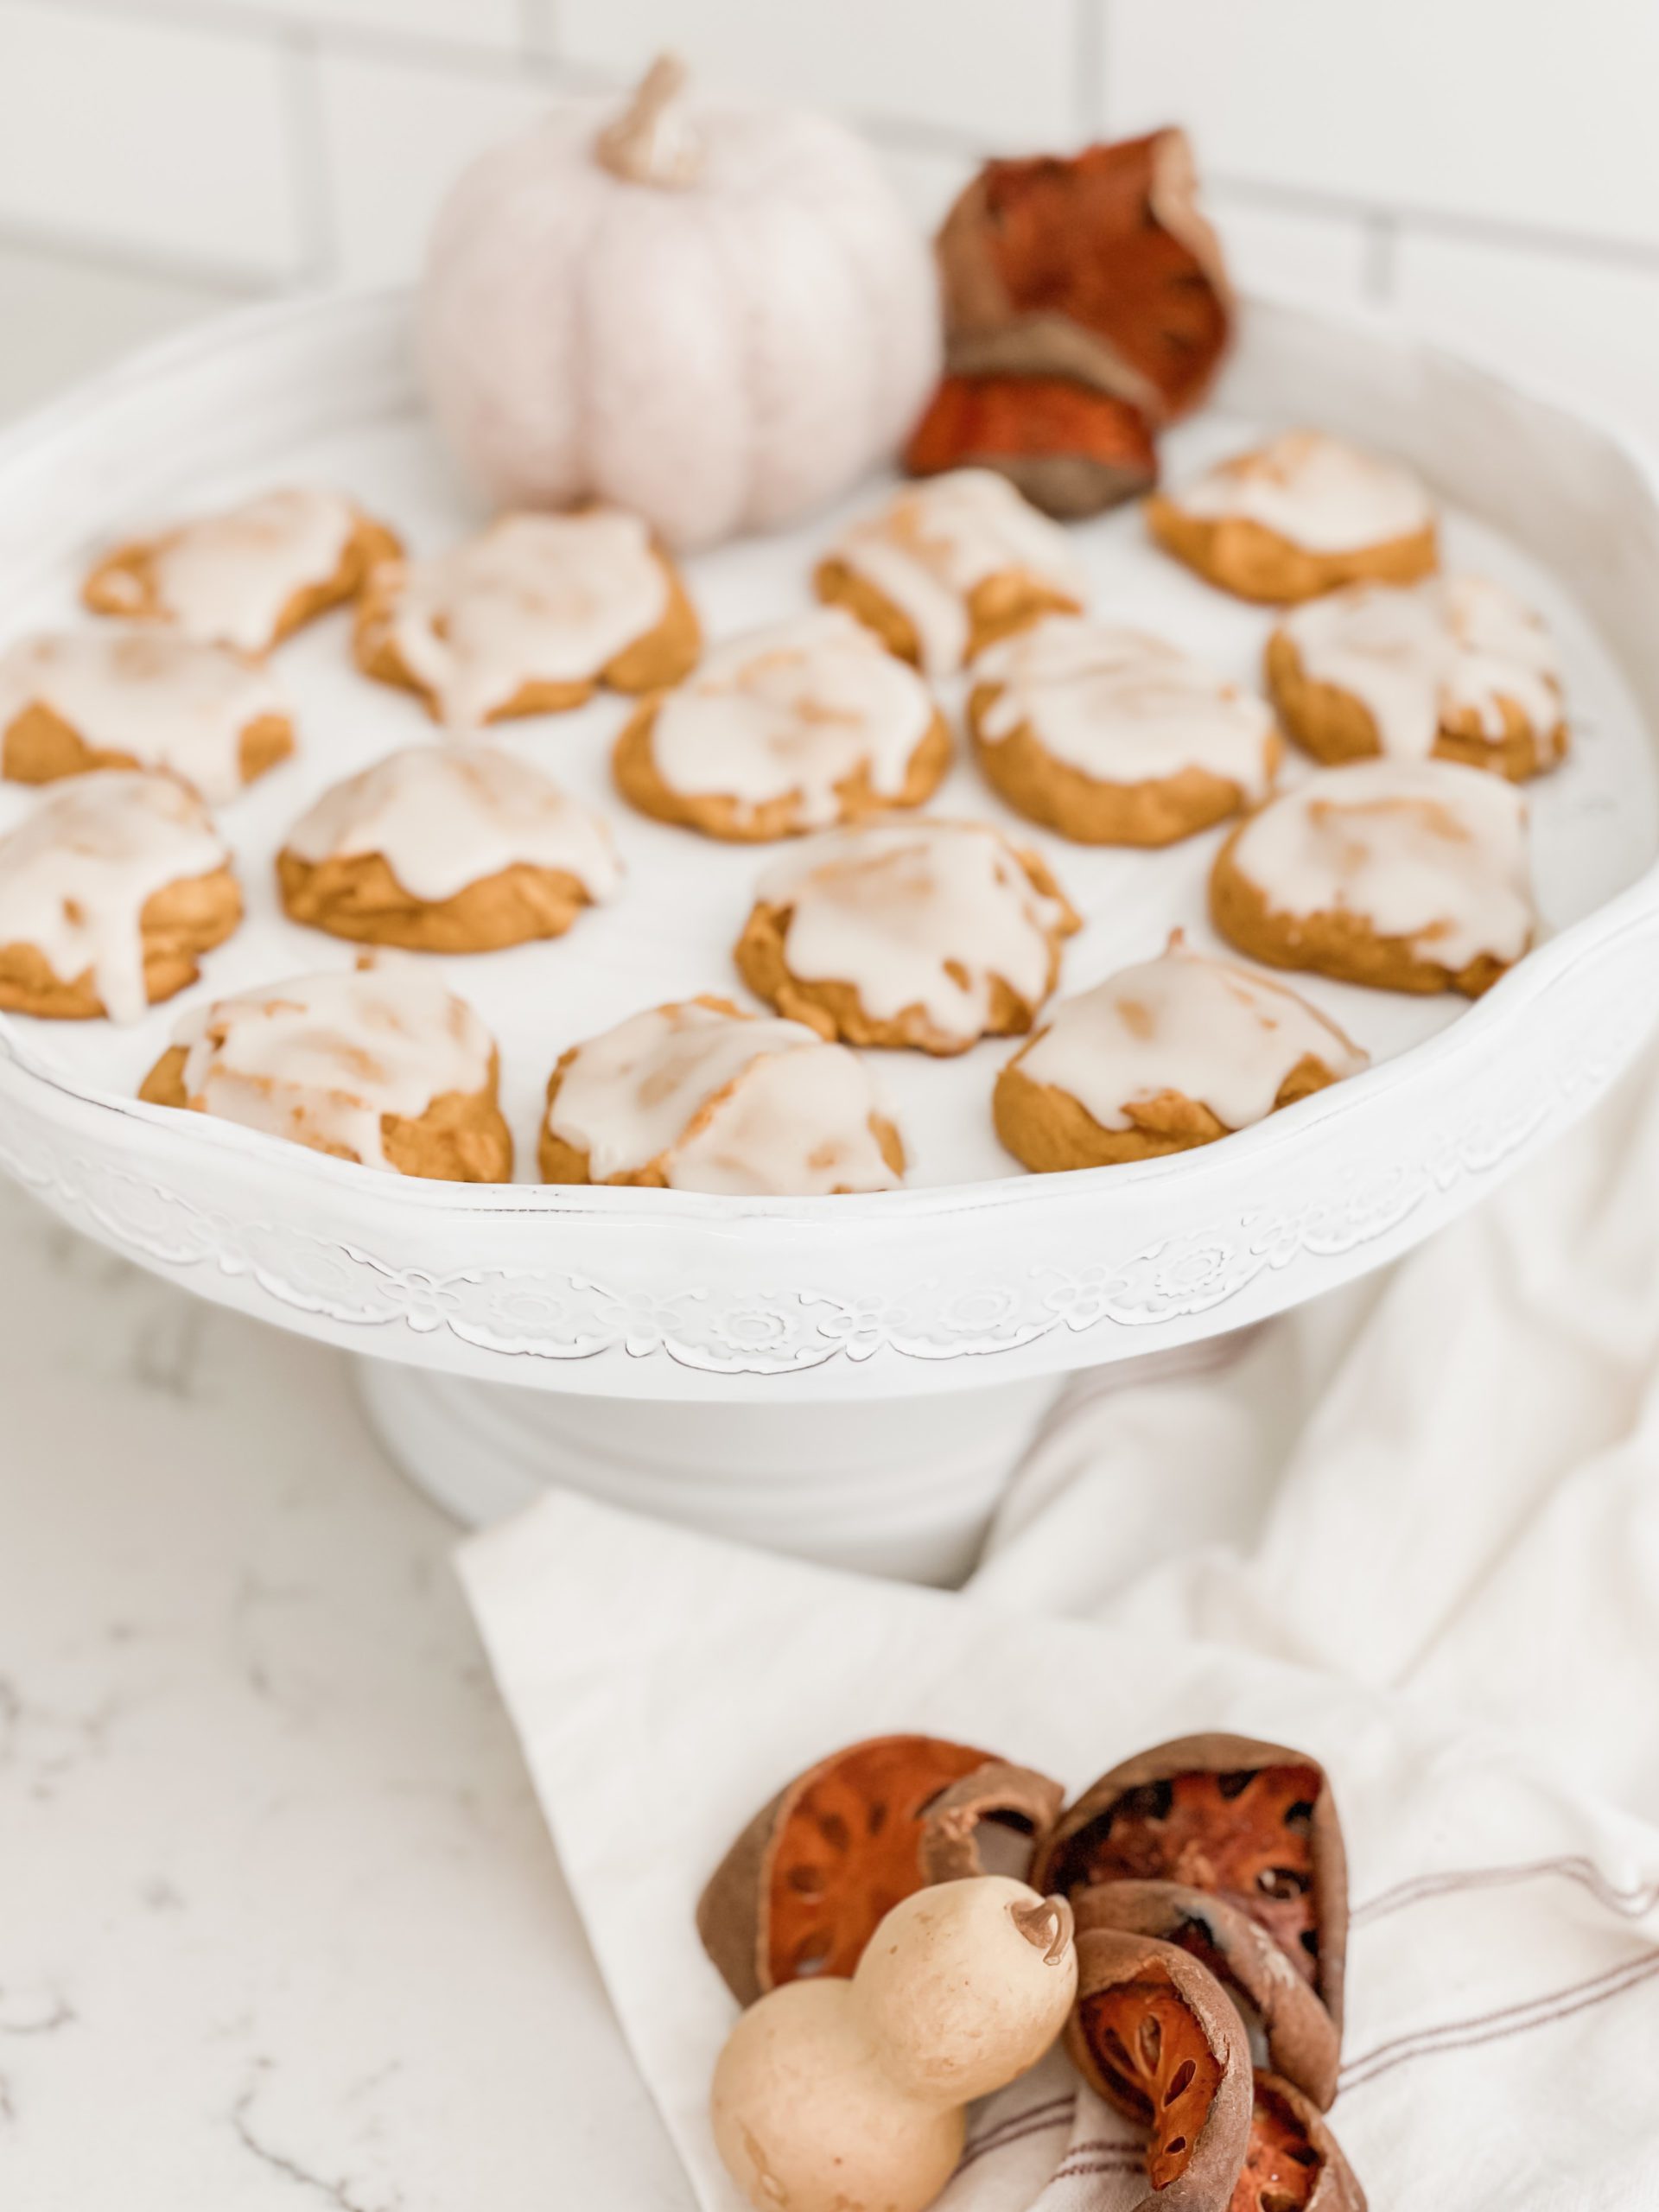 A Roundup of My Favorite Fall Treats